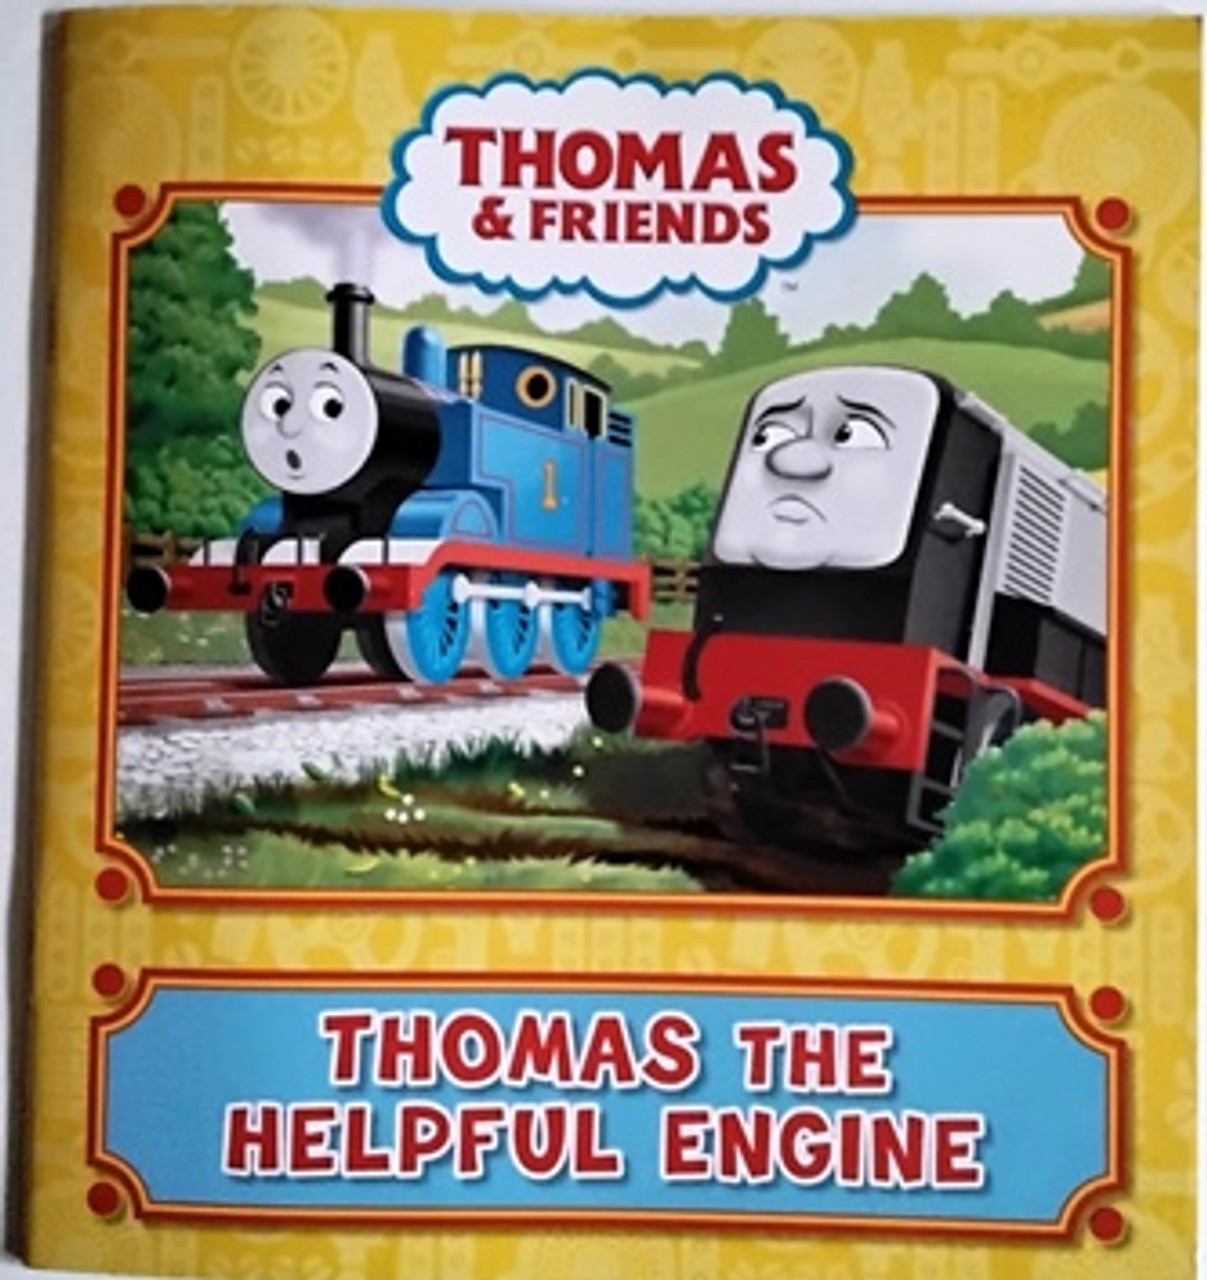 Thomas & Friends: Thomas the Helpful Engine (Children's Picture Book)